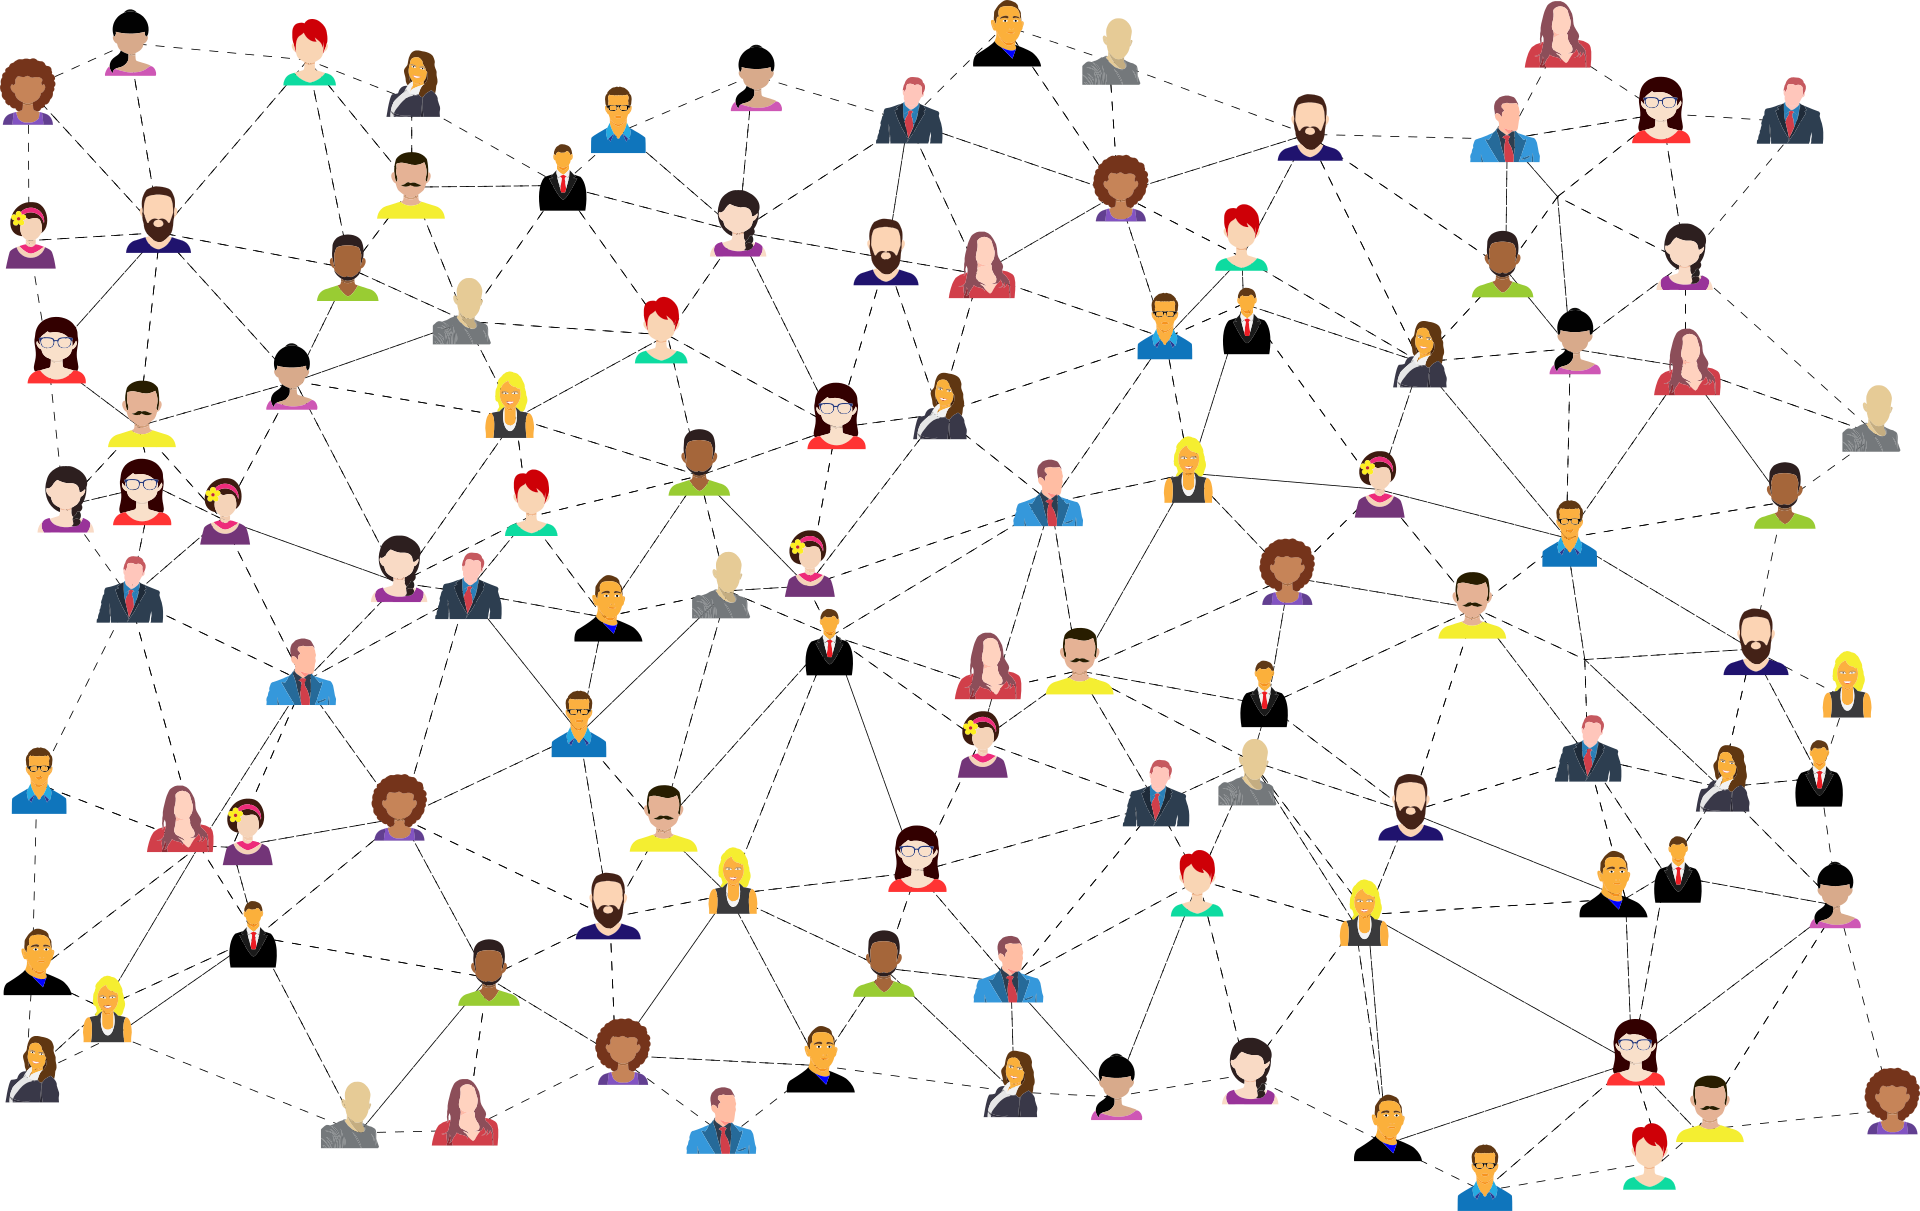 Image of cartoon people connected by dotted lines